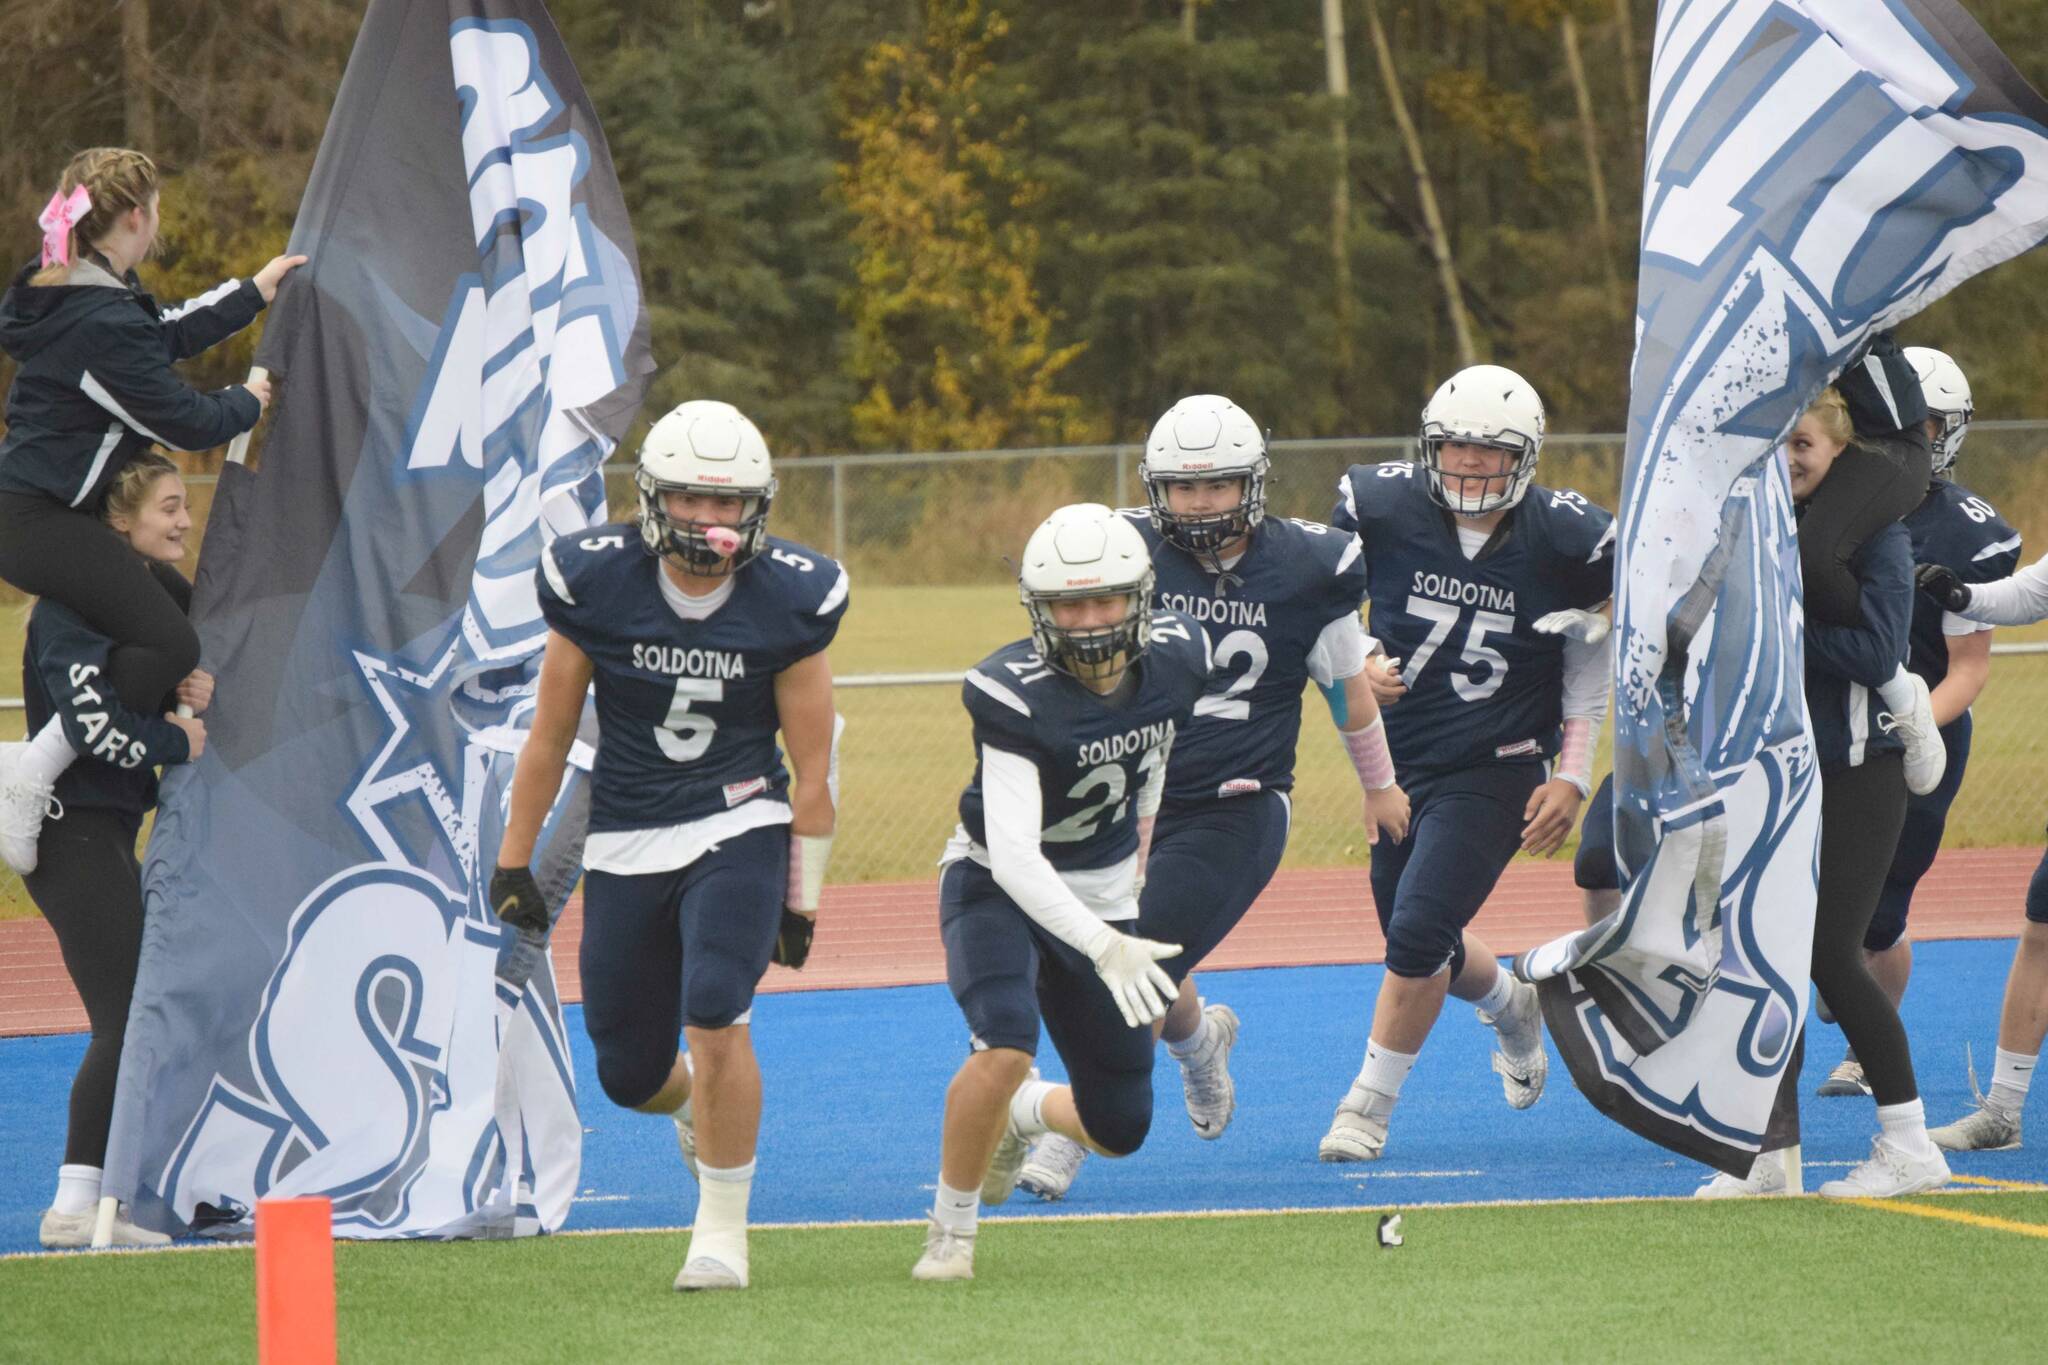 Brock Wilson and Brayden Taylor lead Soldotna onto Justin Maile Field for a Division II semifinal against North Pole on Friday, Oct. 8, 2021, in Soldotna, Alaska. (Photo by Jeff Helminiak/Peninsula Clarion)